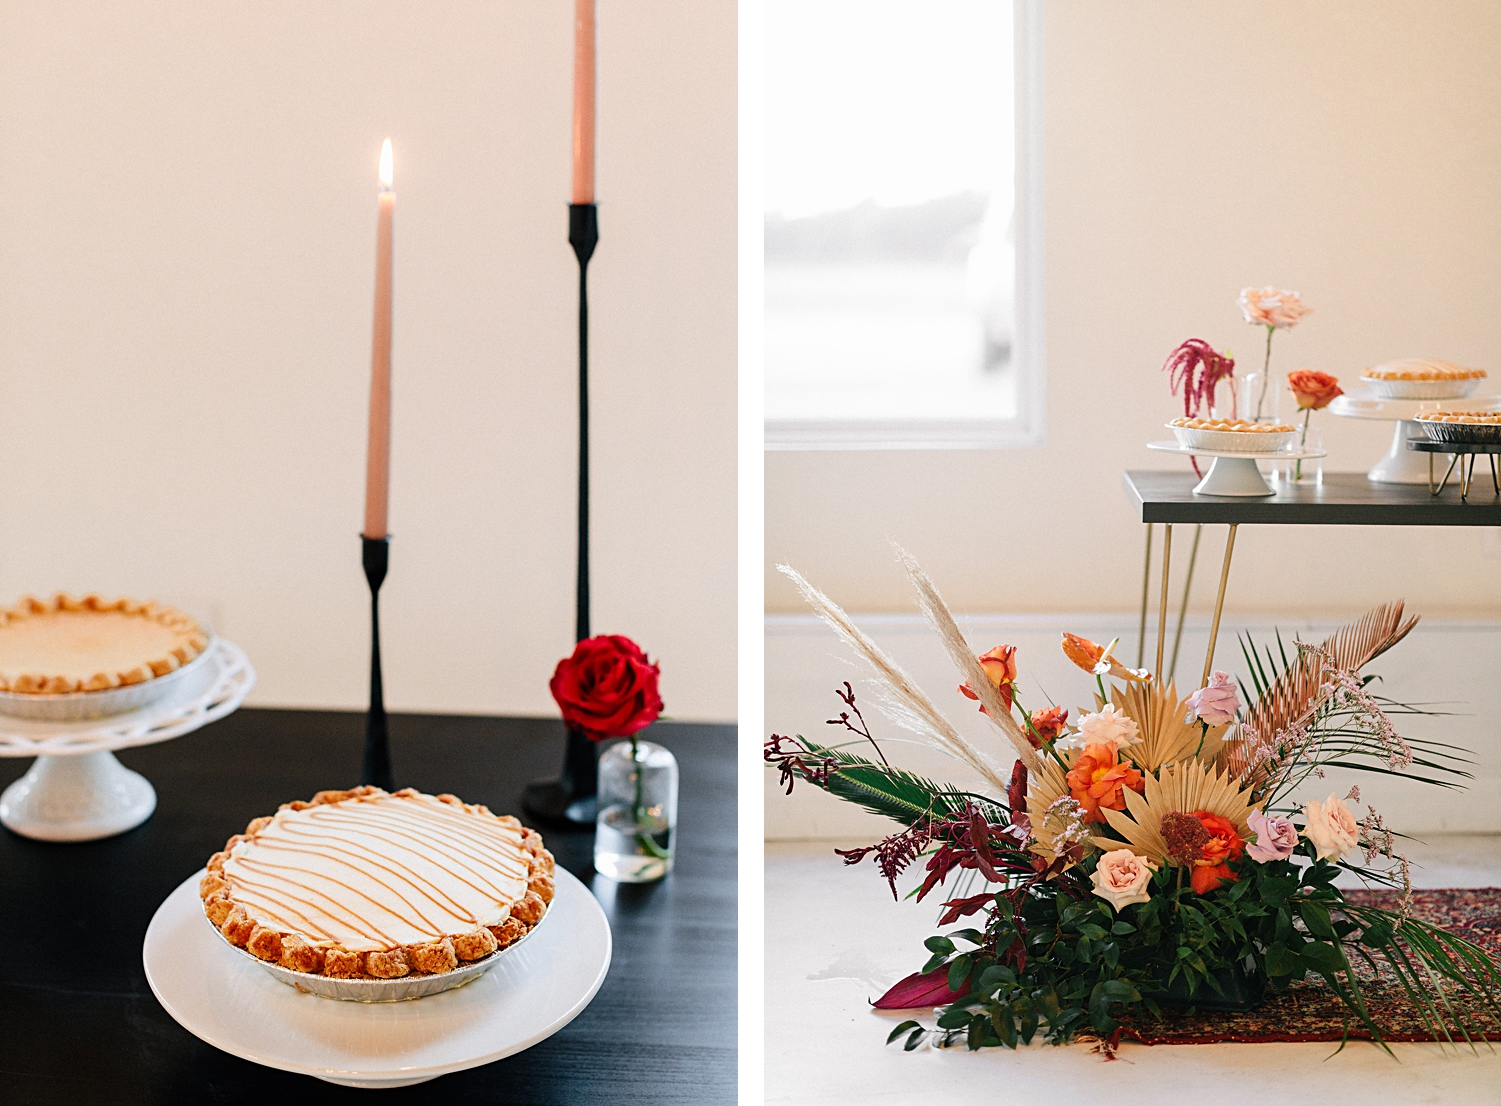 pies, candles, and red pink flowers on black table